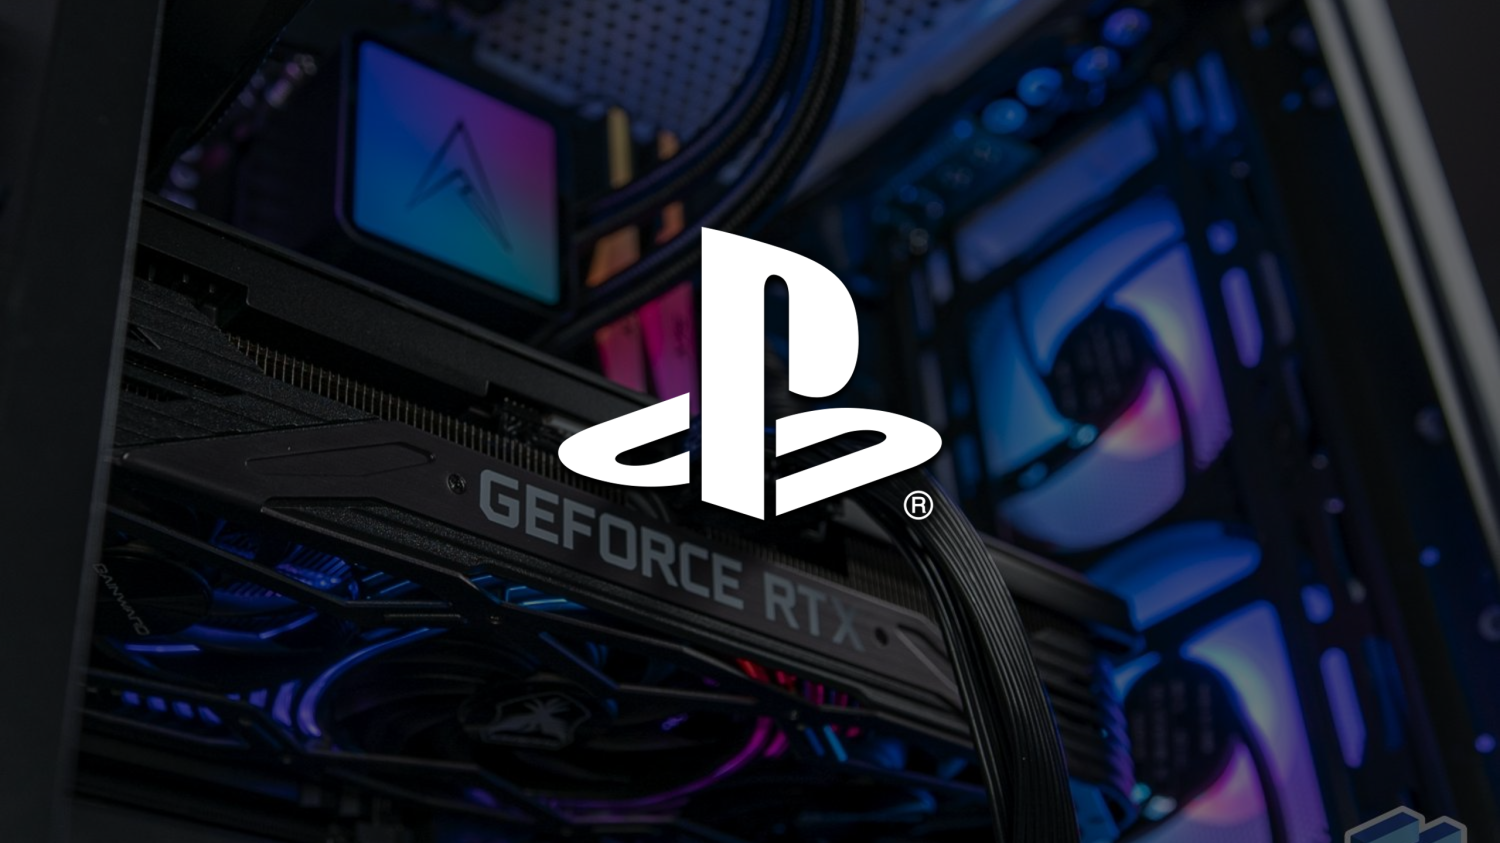 Sony to Port More PS4 Games to the PC